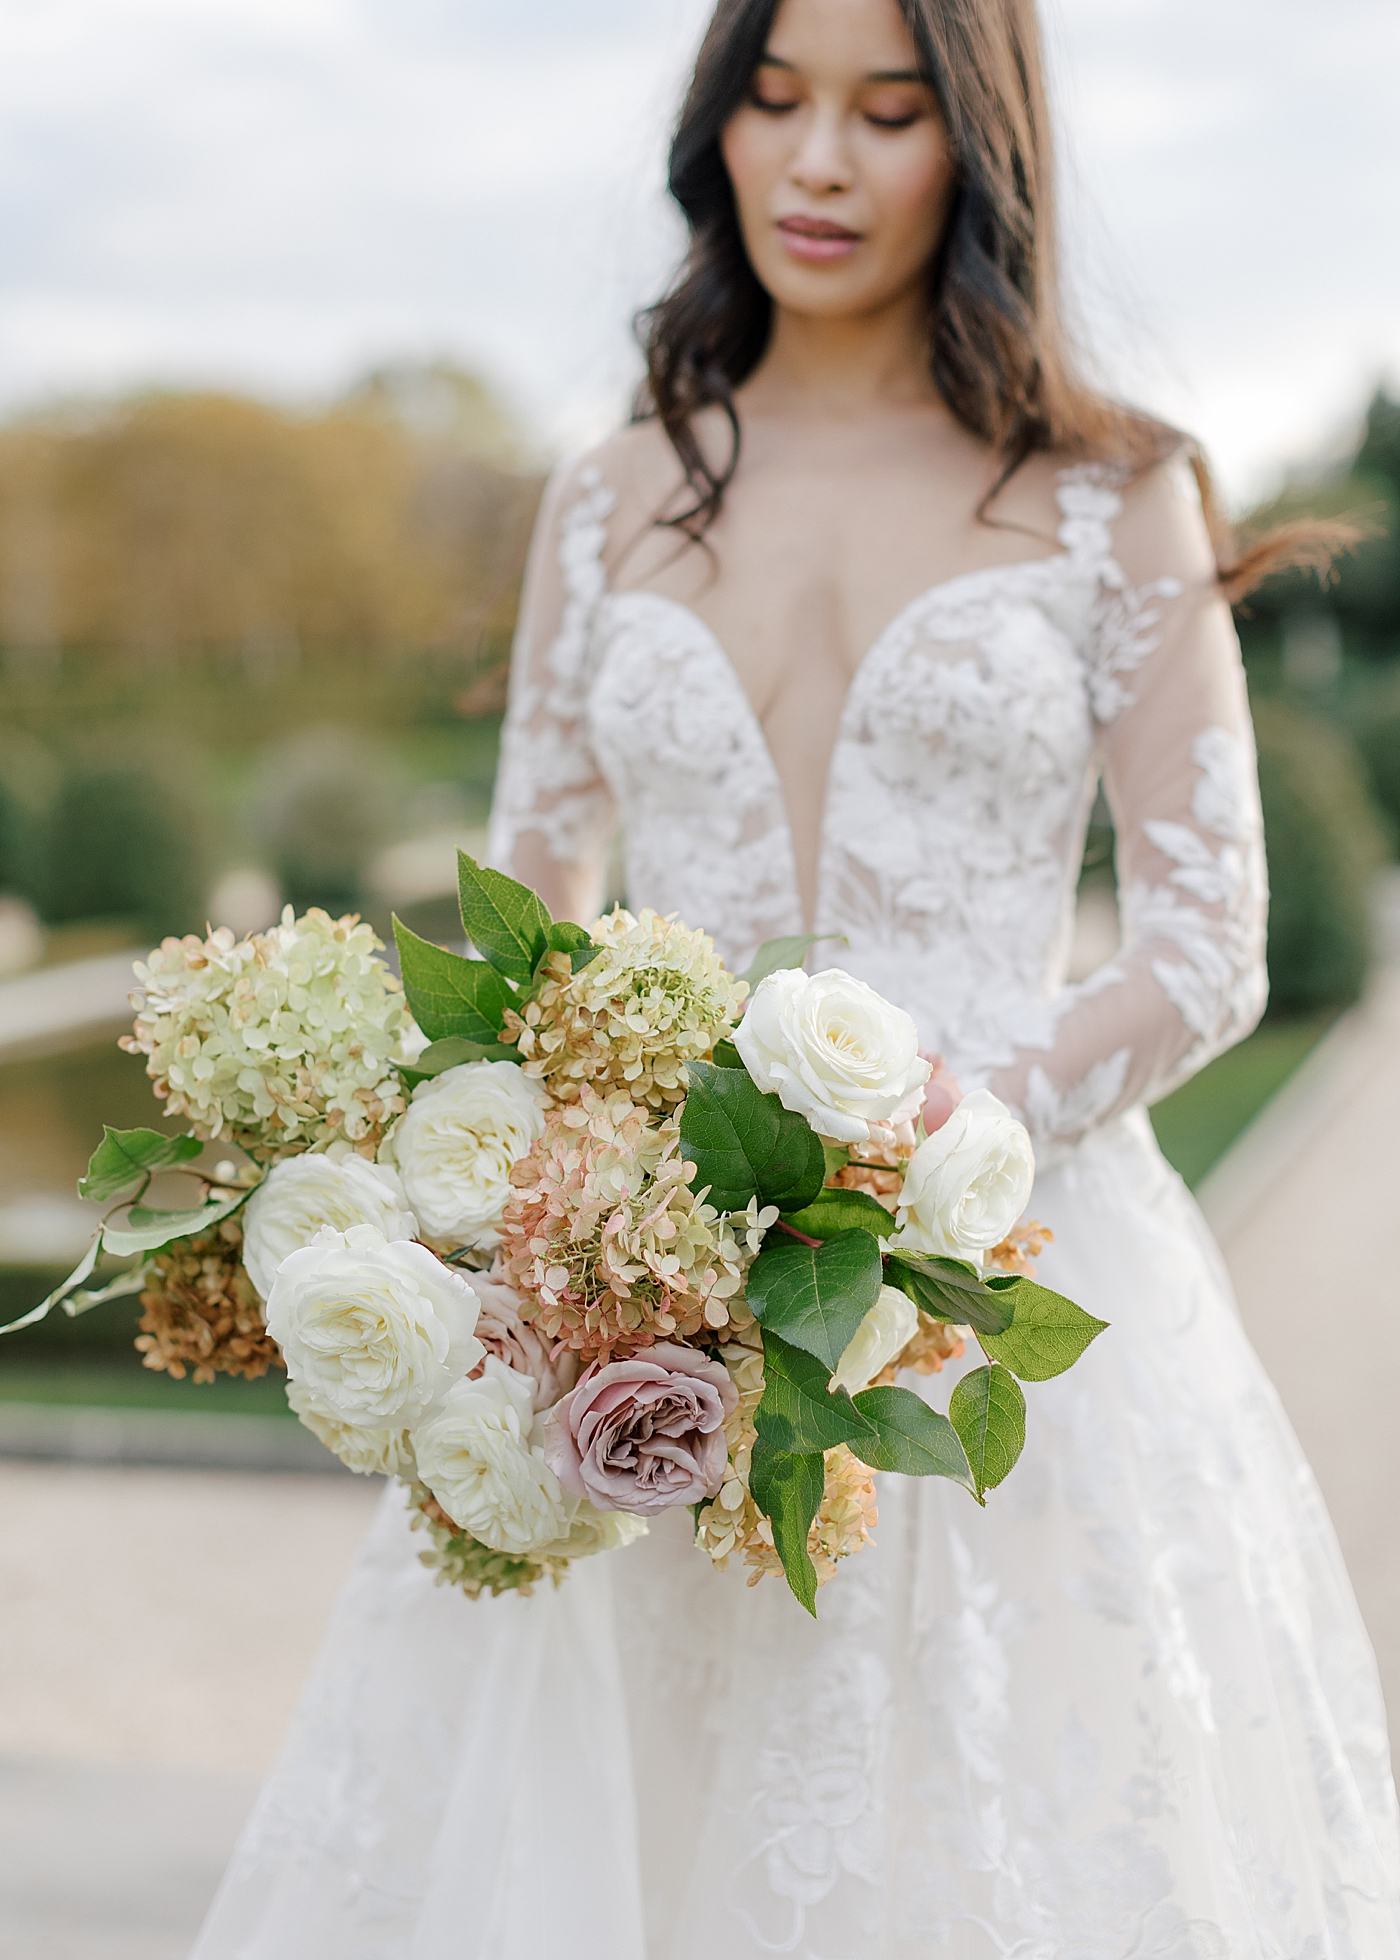 Bride posing with flowers during Oheka castle wedding | Image by Hope Helmuth Photography